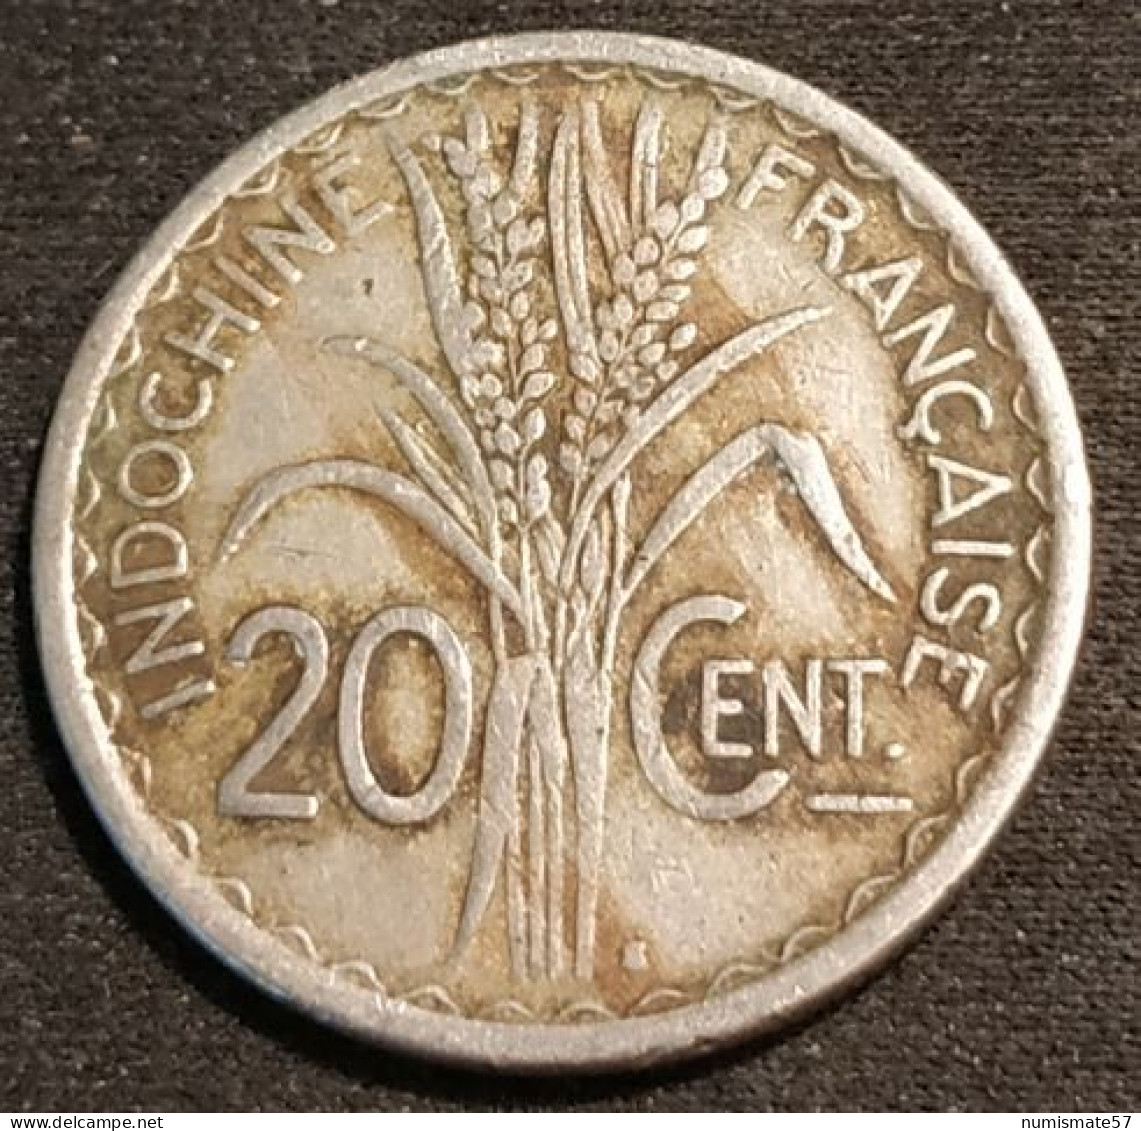 INDOCHINE - 20 CENTIMES 1941 S - KM 23a.2 - French Indochina